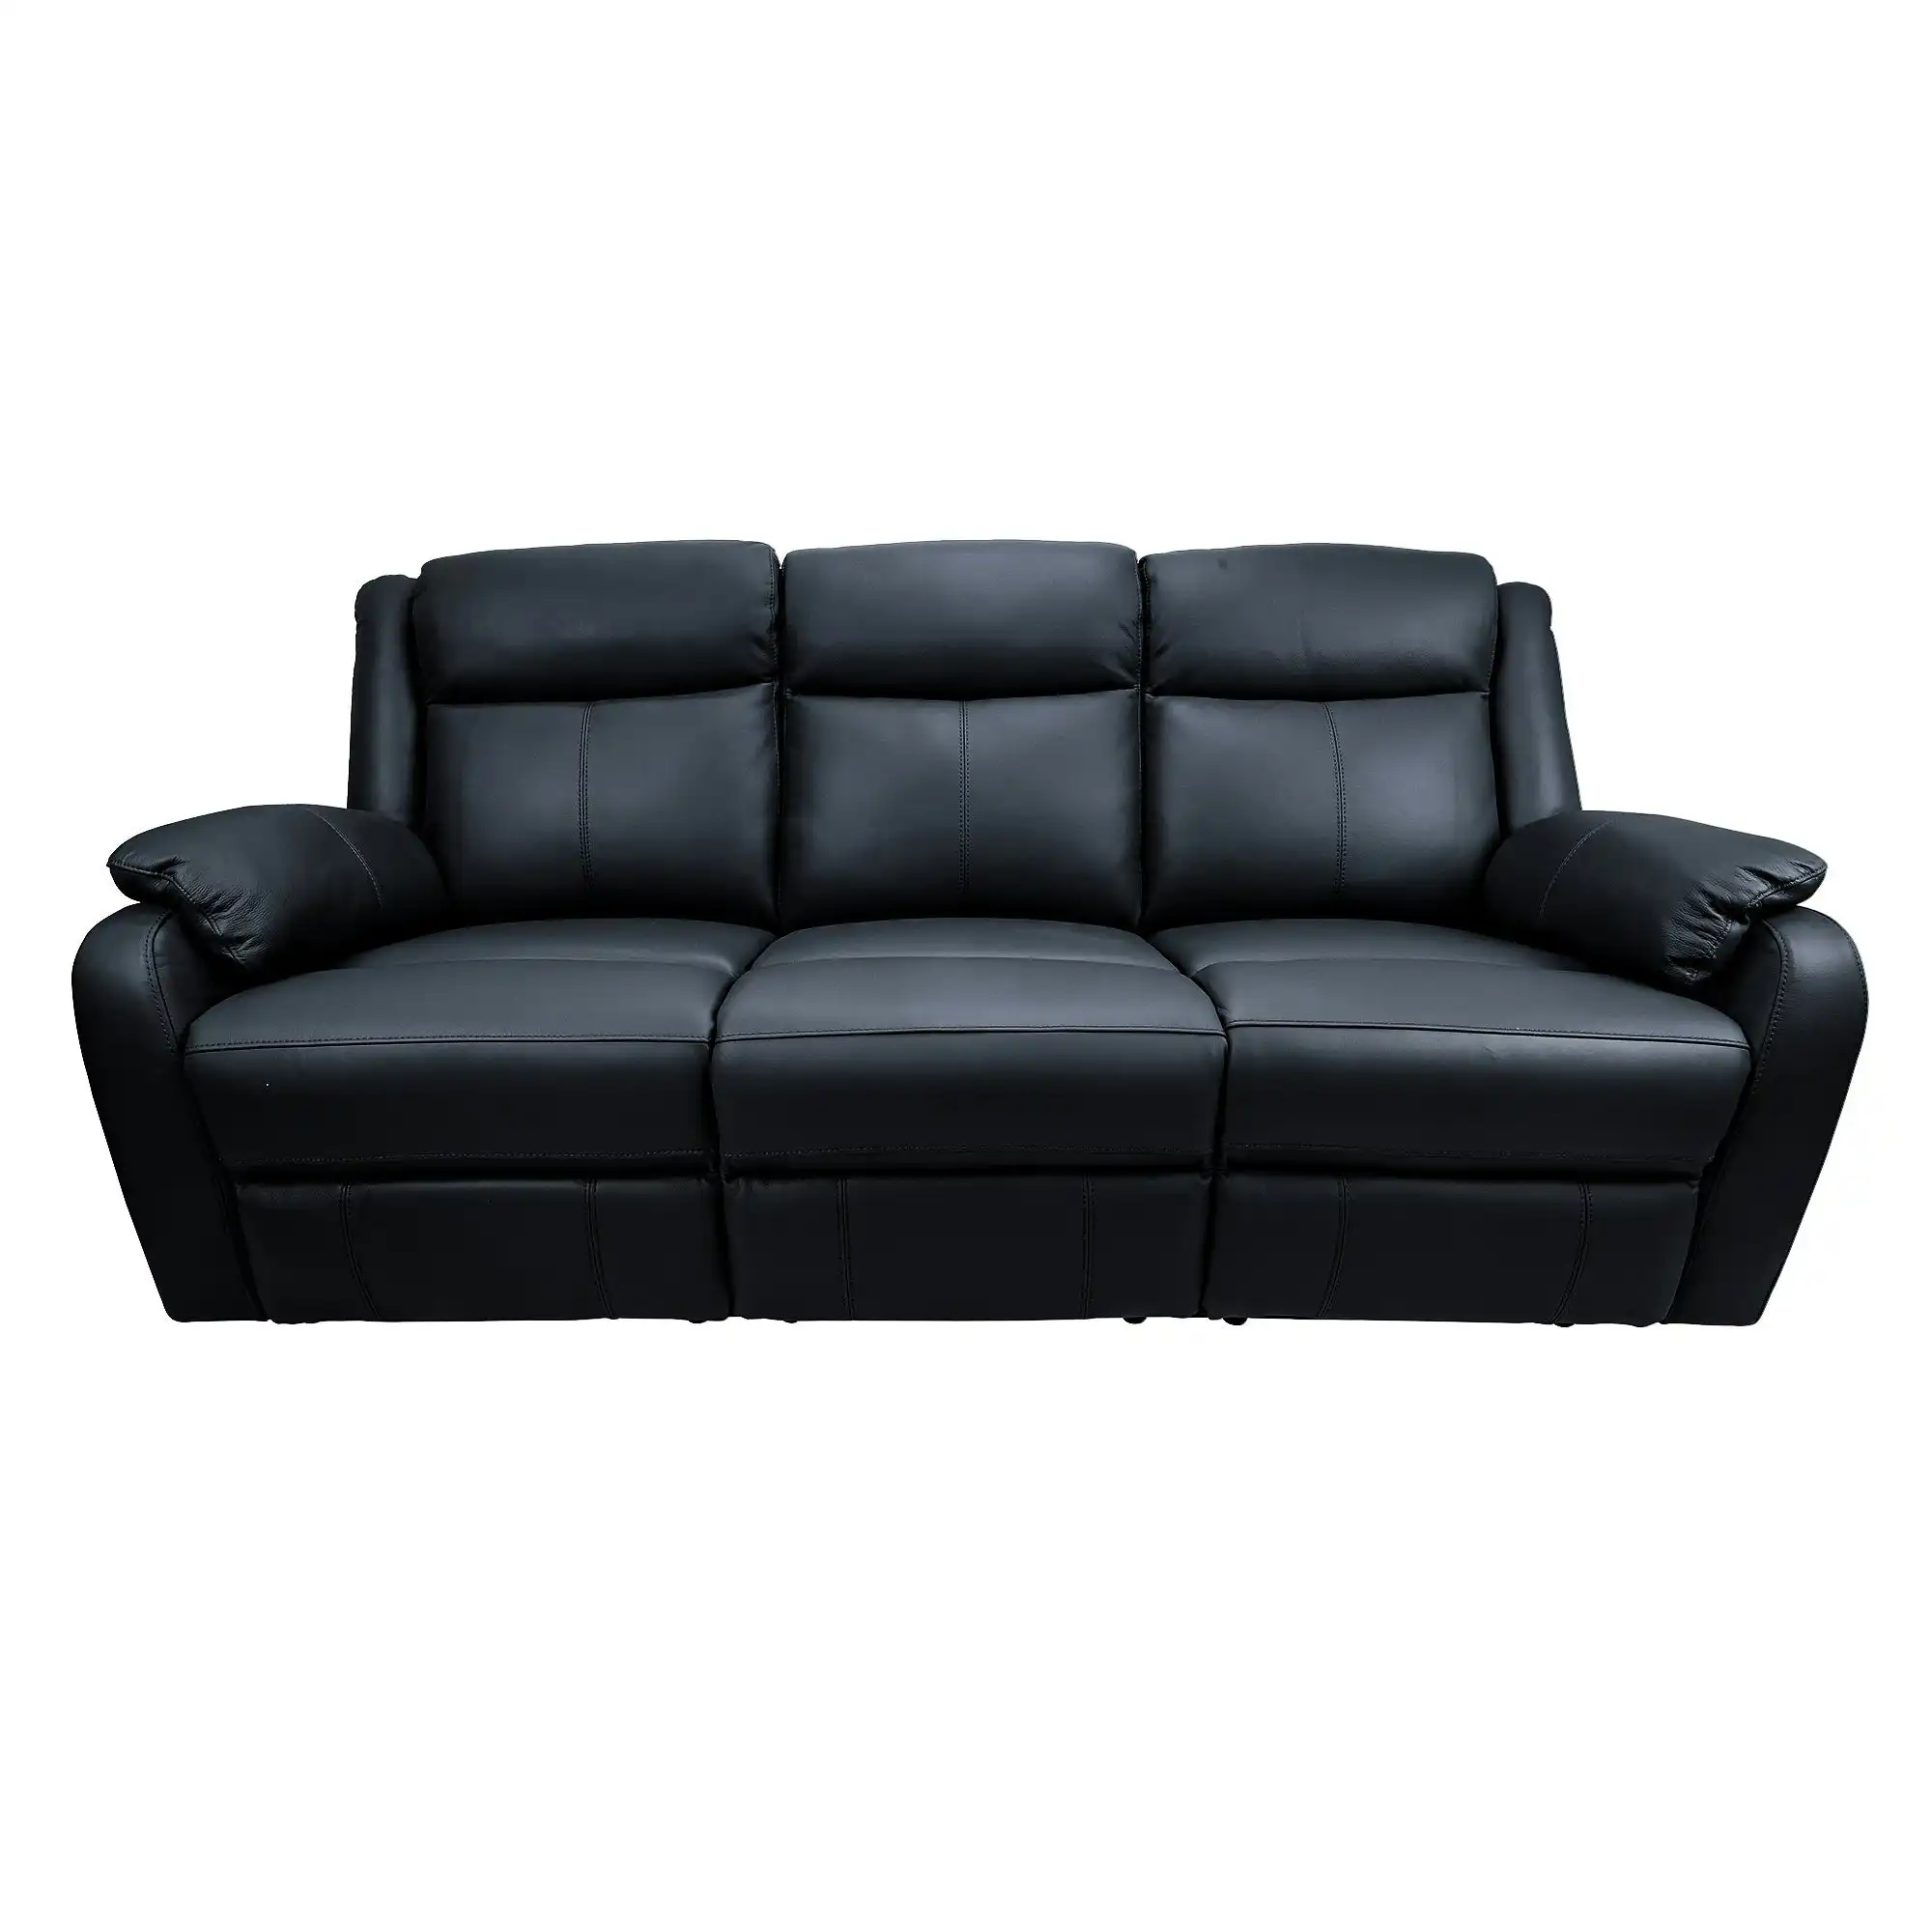 Bella 3 Seater Leather Electric Recliner Sofa Lounge